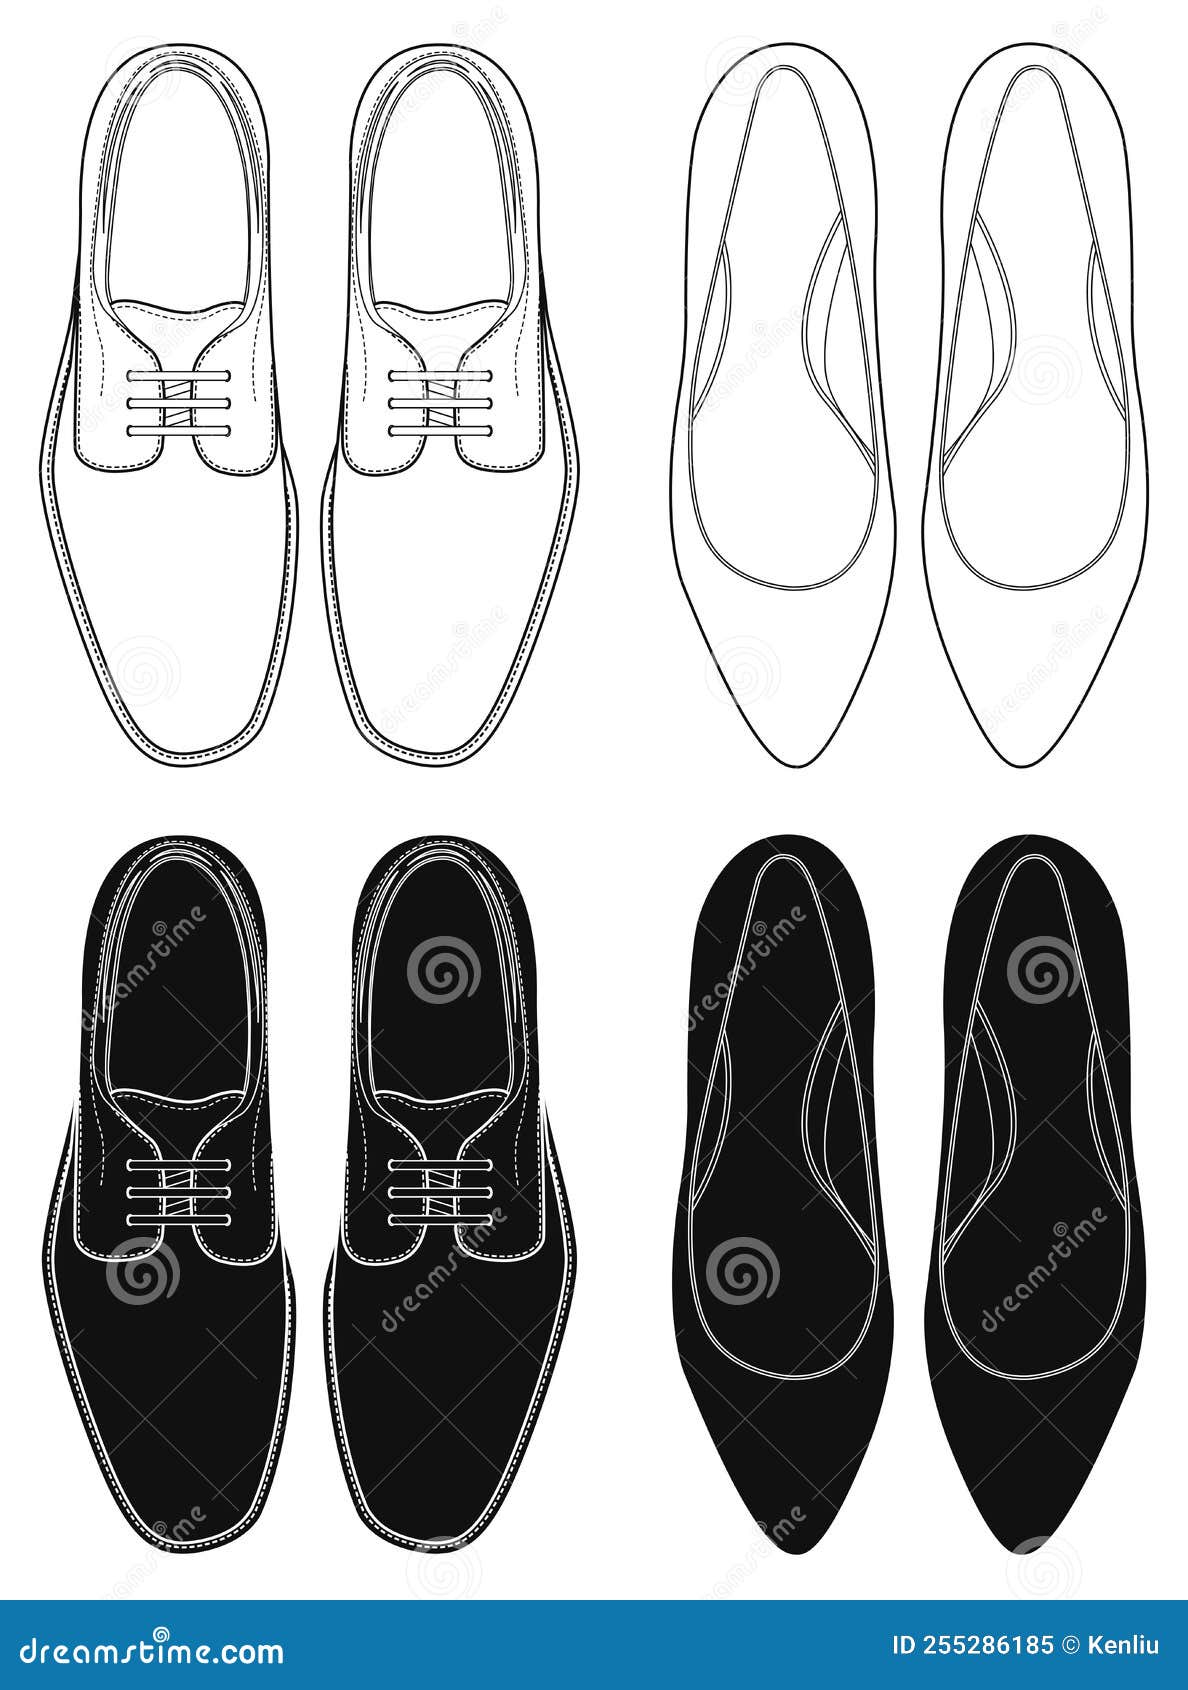 Formal shoes Illustrations and Clip Art 3129 Formal shoes royalty free  illustrations drawings and graphics available to search from thousands of  vector EPS clipart producers